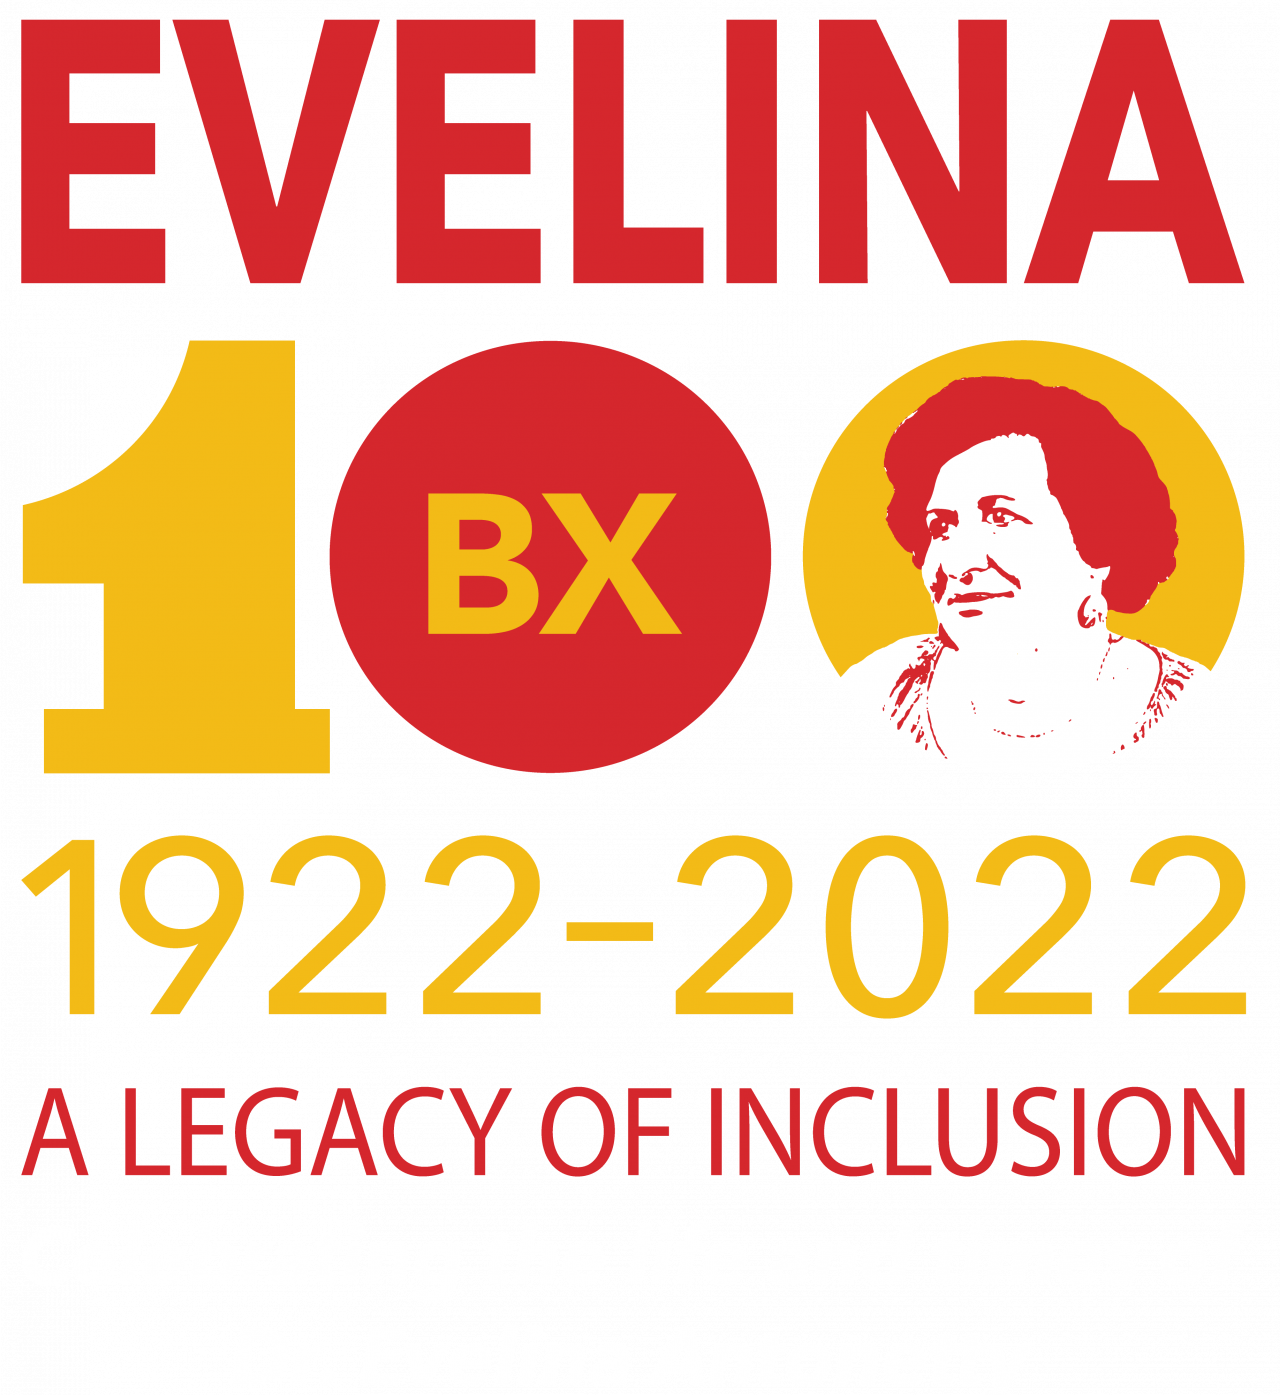 http://evelina100.org/wp-content/uploads/2022/08/Evelia100-Logo-Complete-1280x1395.png